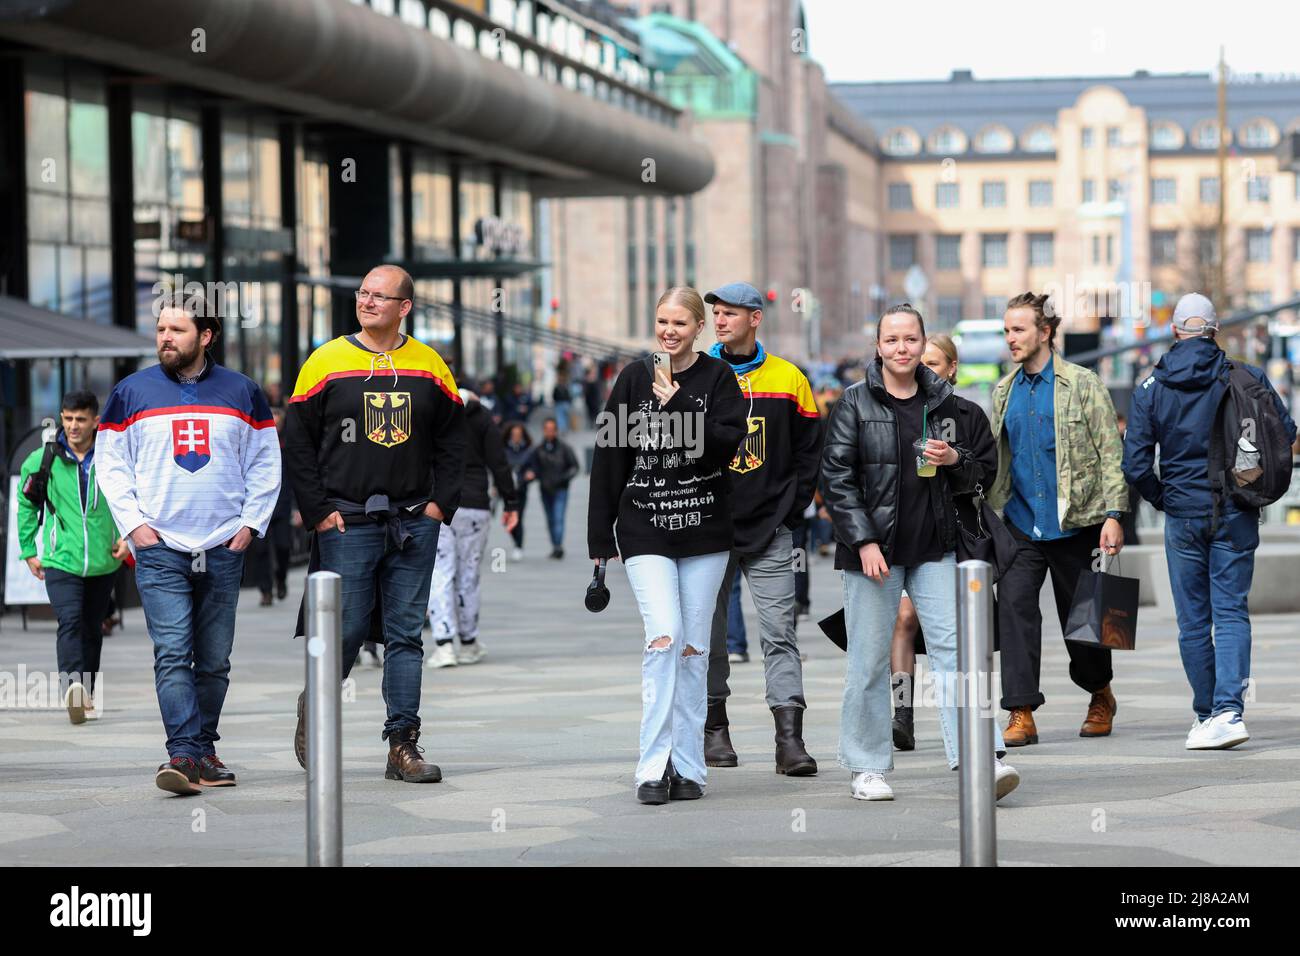 Helsinki, Finland. 14th May, 2022. Fans of the German and Slovakian national ice hockey teams seen walking in Helsinki city center. On May 13, the Ice Hockey World Championship 2022 began in Finland. Hockey fans from many countries arrived in Helsinki and Tampere, the citys where the matches will take place. (Photo by Takimoto Marina/SOPA Images/Sipa USA) Credit: Sipa USA/Alamy Live News Stock Photo